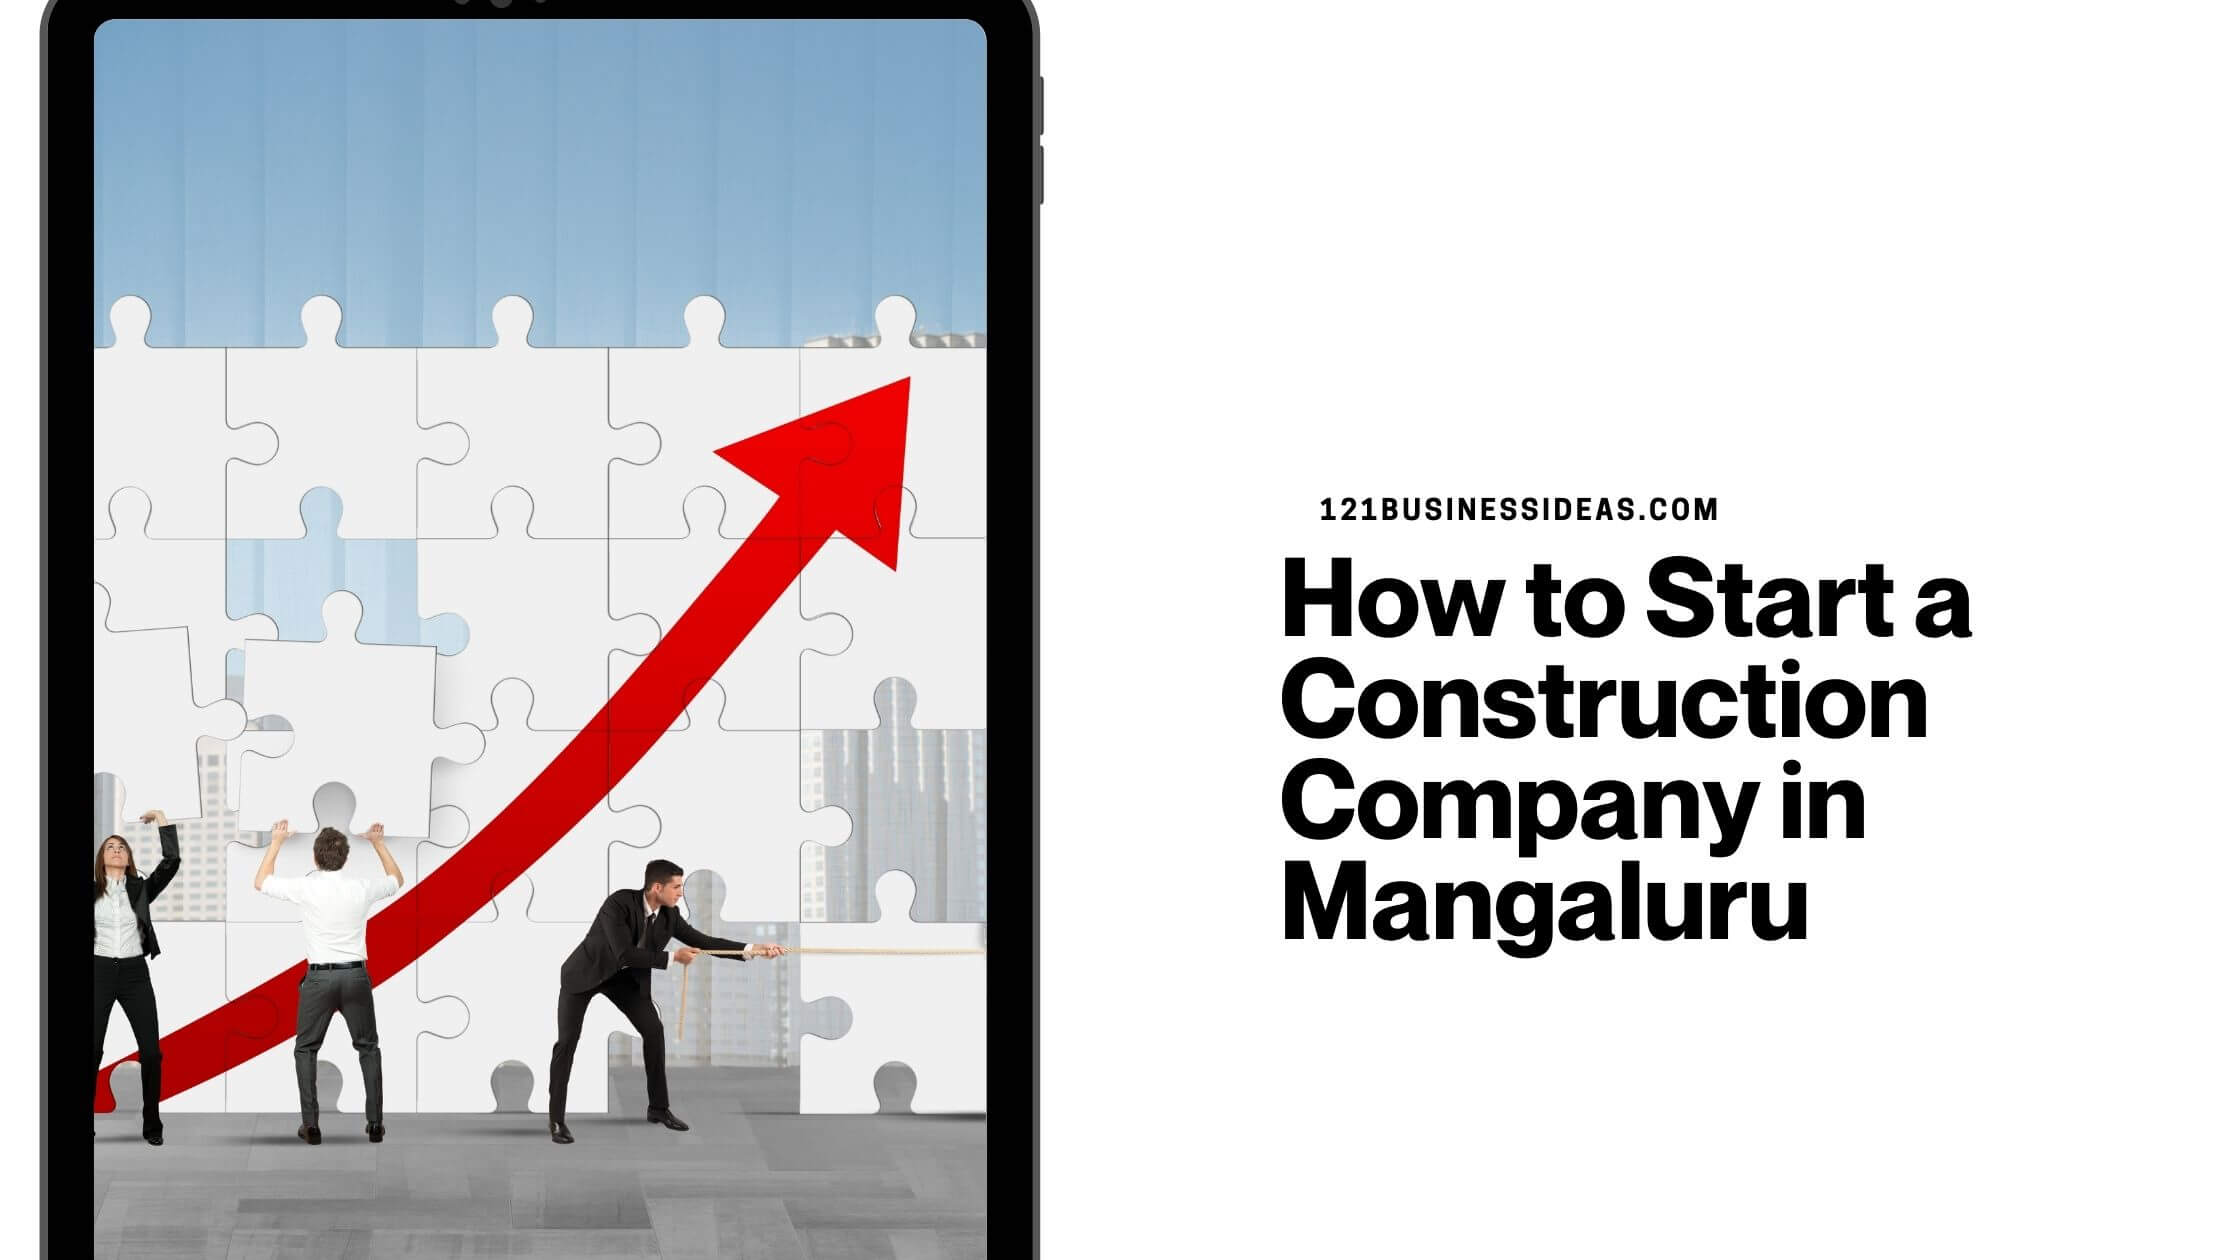 How to Start a Construction Company in Mangaluru (1)